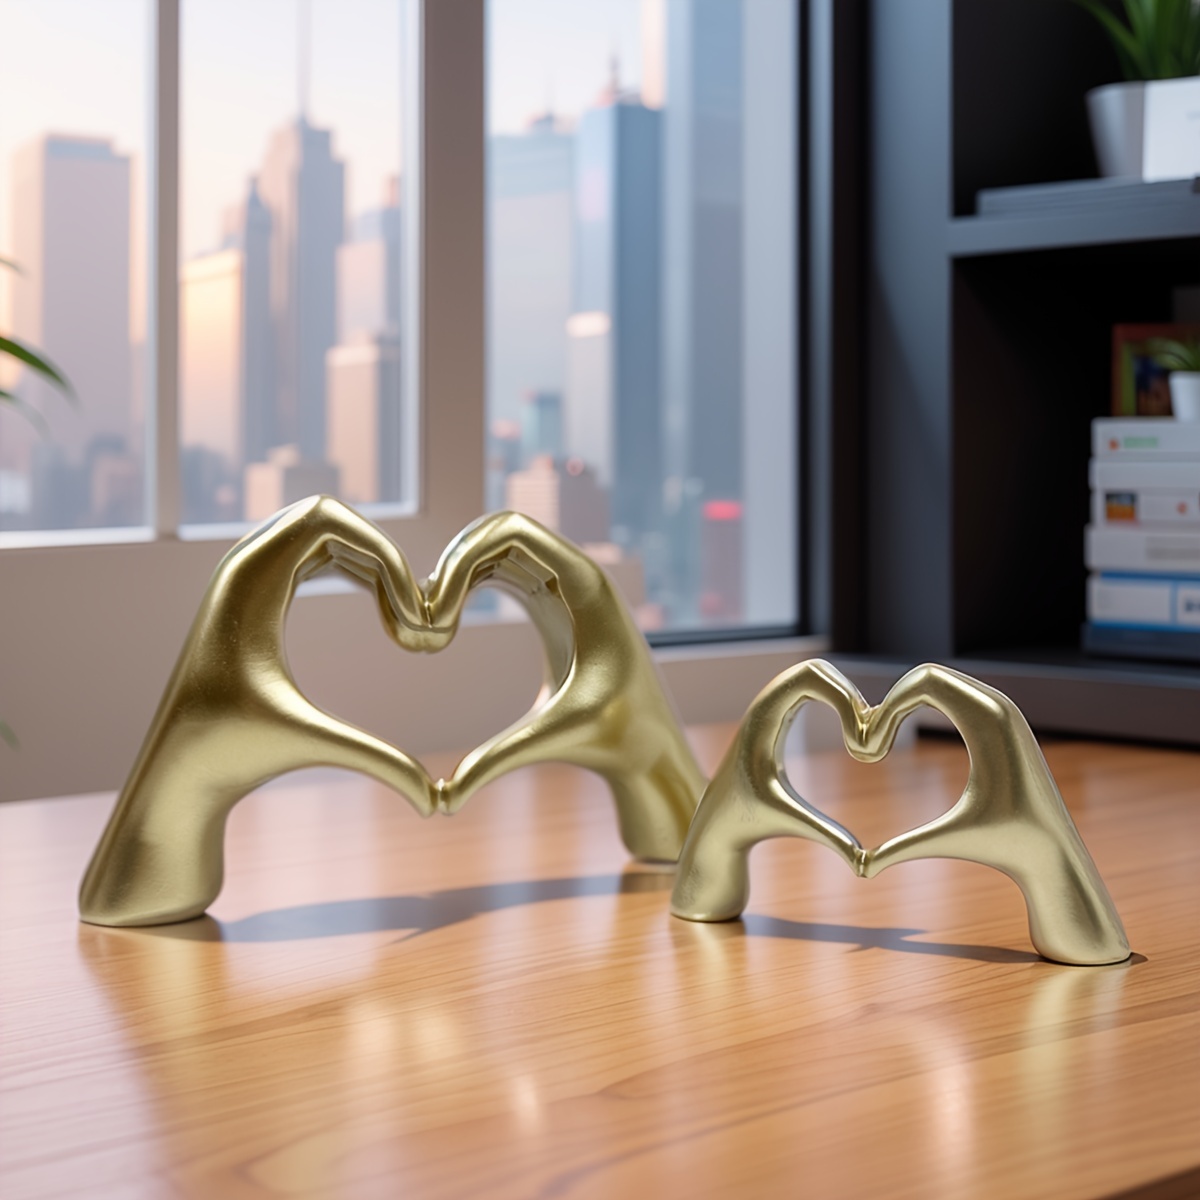  TIMEBUS Heart Hands Sculpture Modern Home Decor, Art Hand  Sculpture Home Decorations for Living Room, Nary Blue Love Finger Statue  for Bedroom Shelf Coffee Table Centerpiece Gifts for Women Wedding 